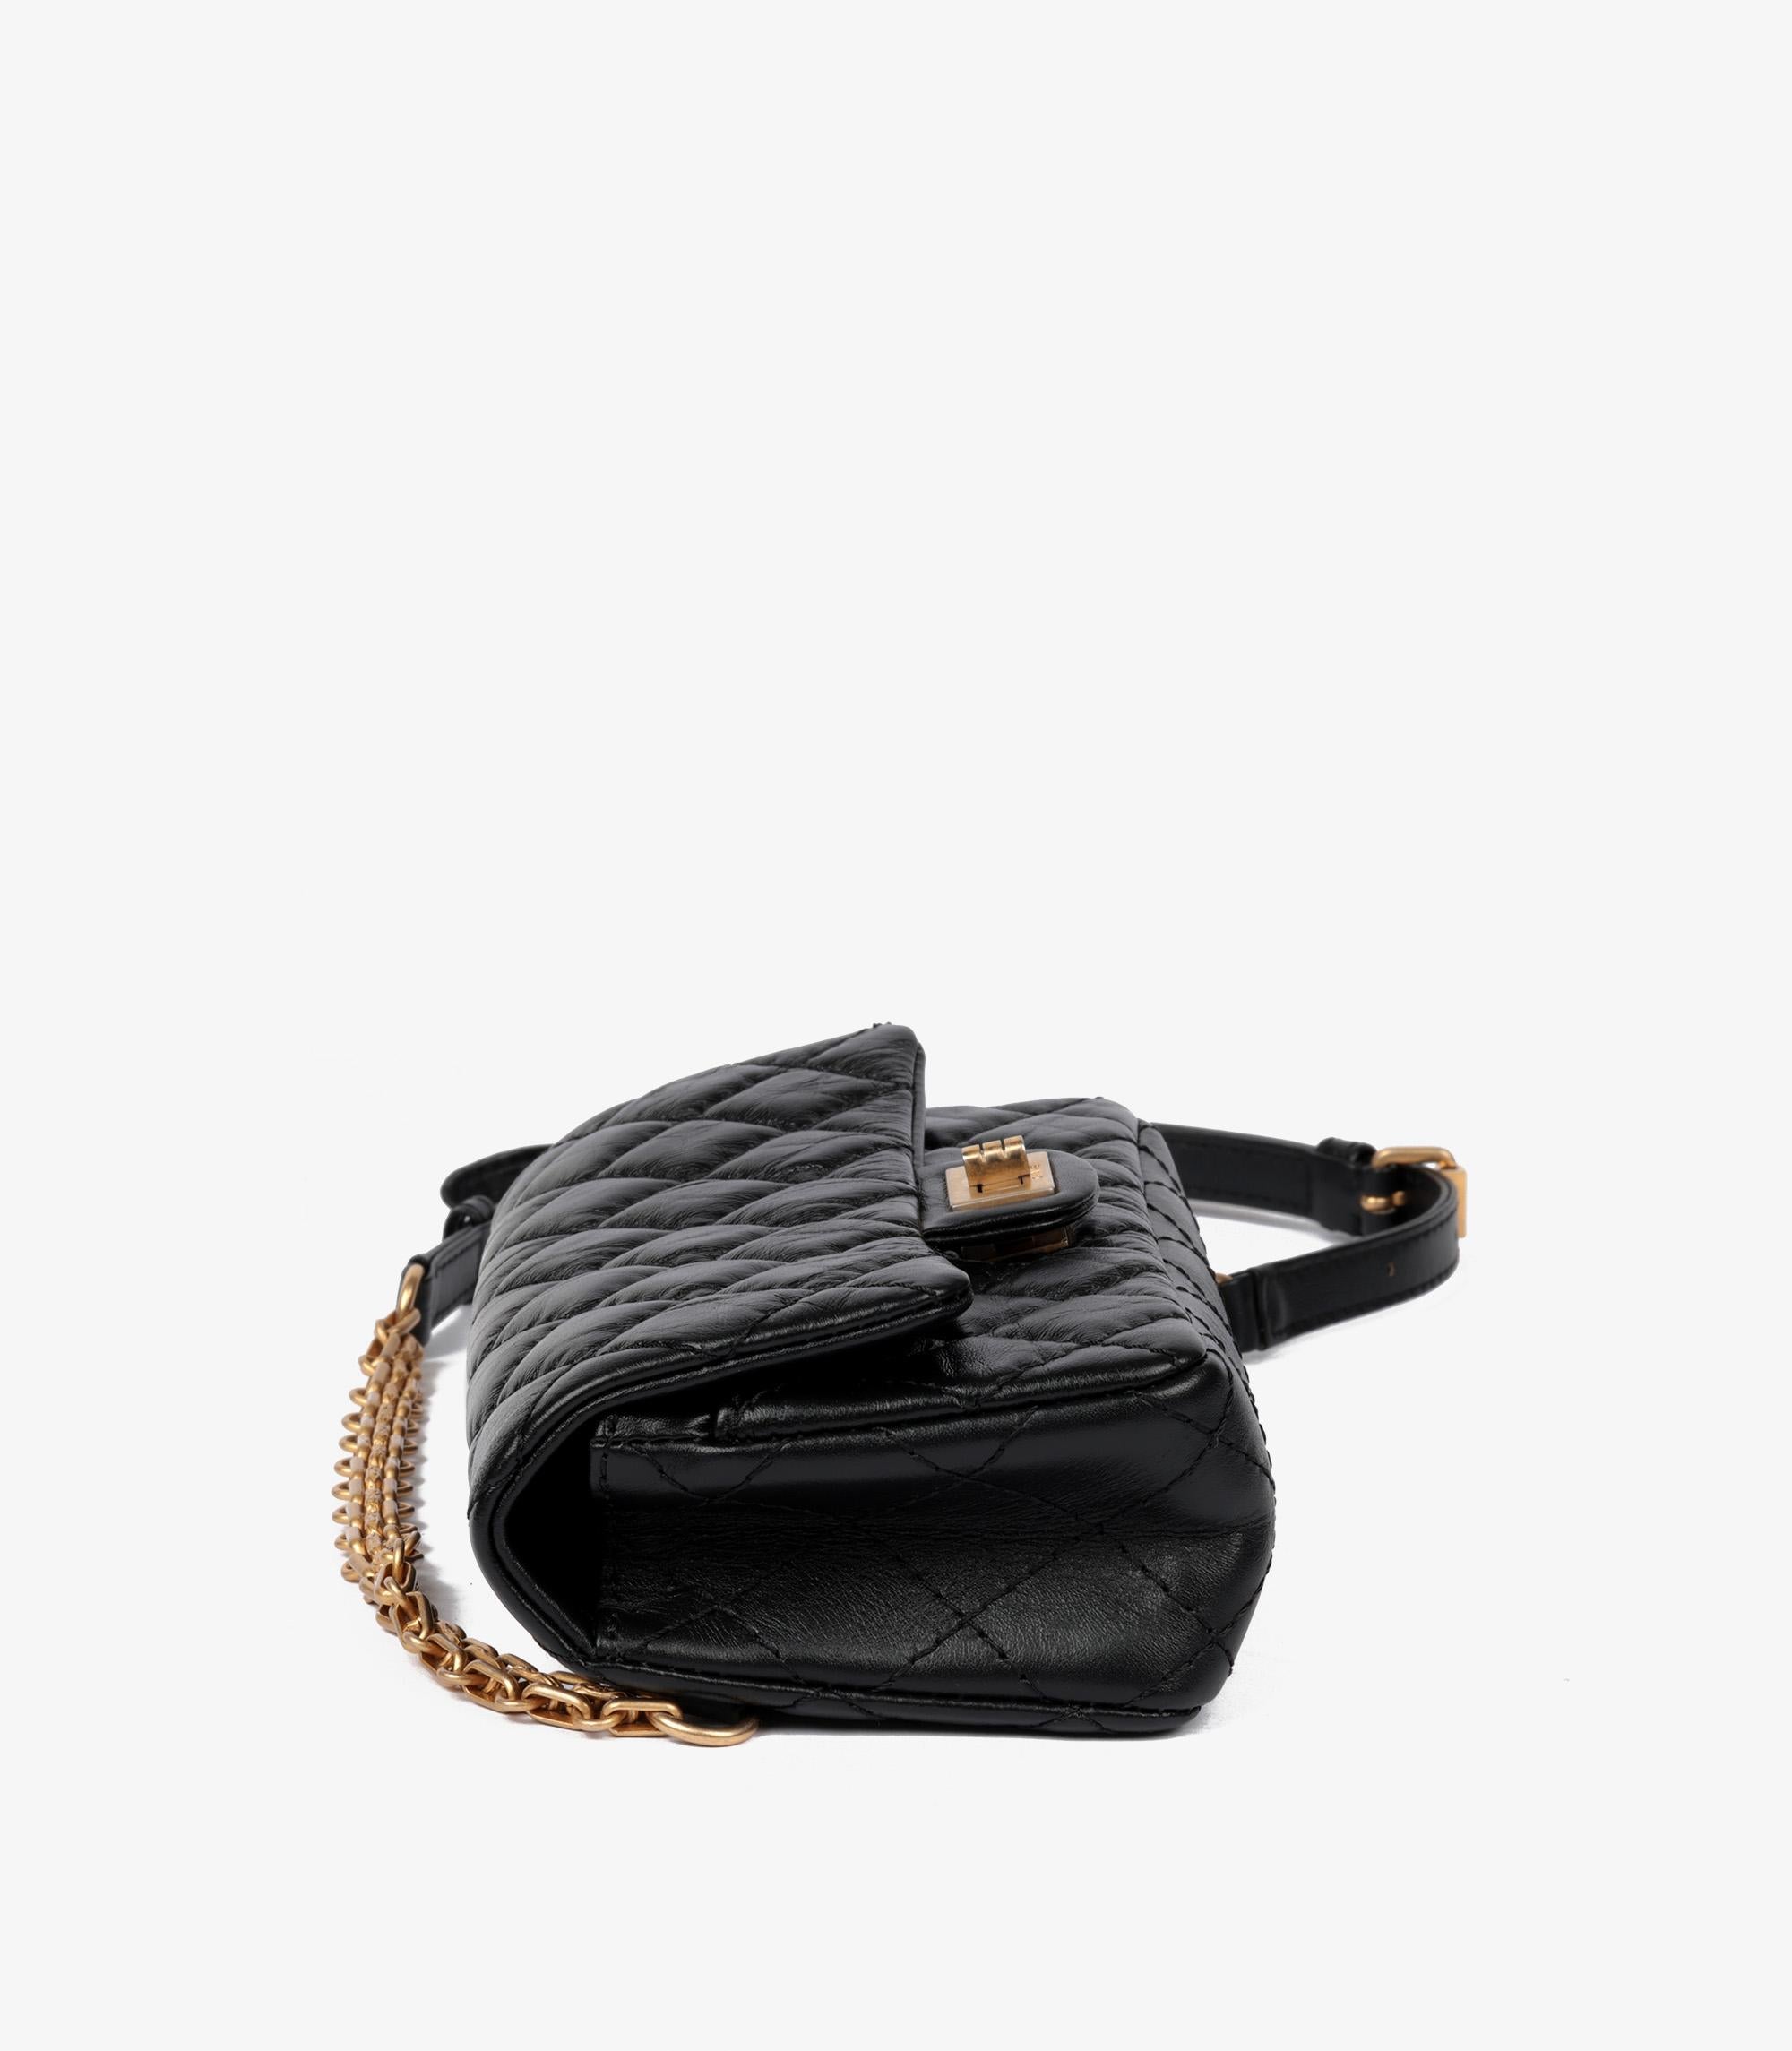 Chanel Black Quilted Aged Calfskin Leather 2.55 Reissue Belt Bag For Sale 1